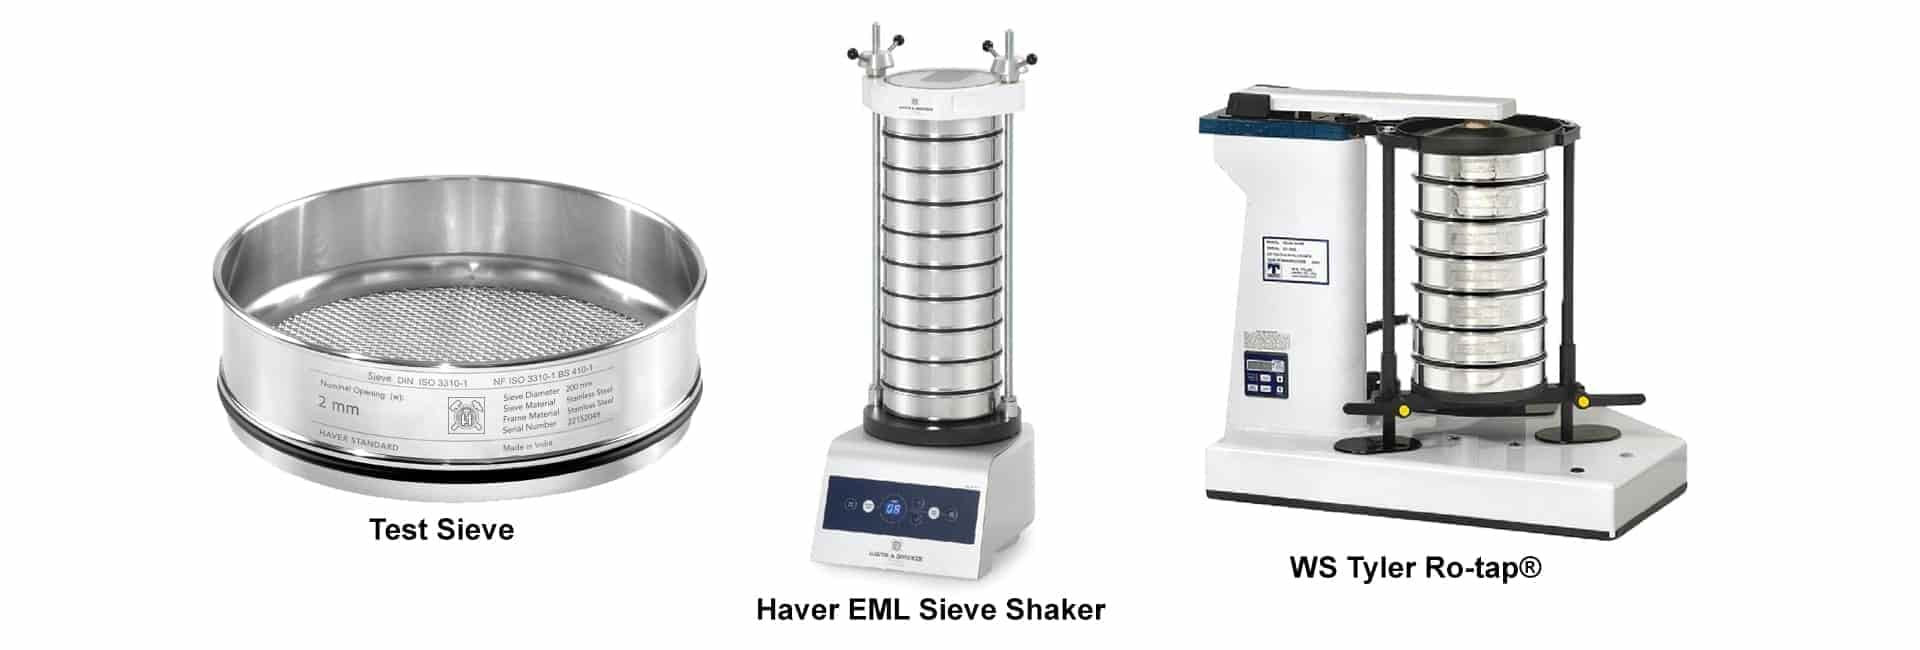 Sieve analysis equipment including test sieves and a mechanical sieve shaker